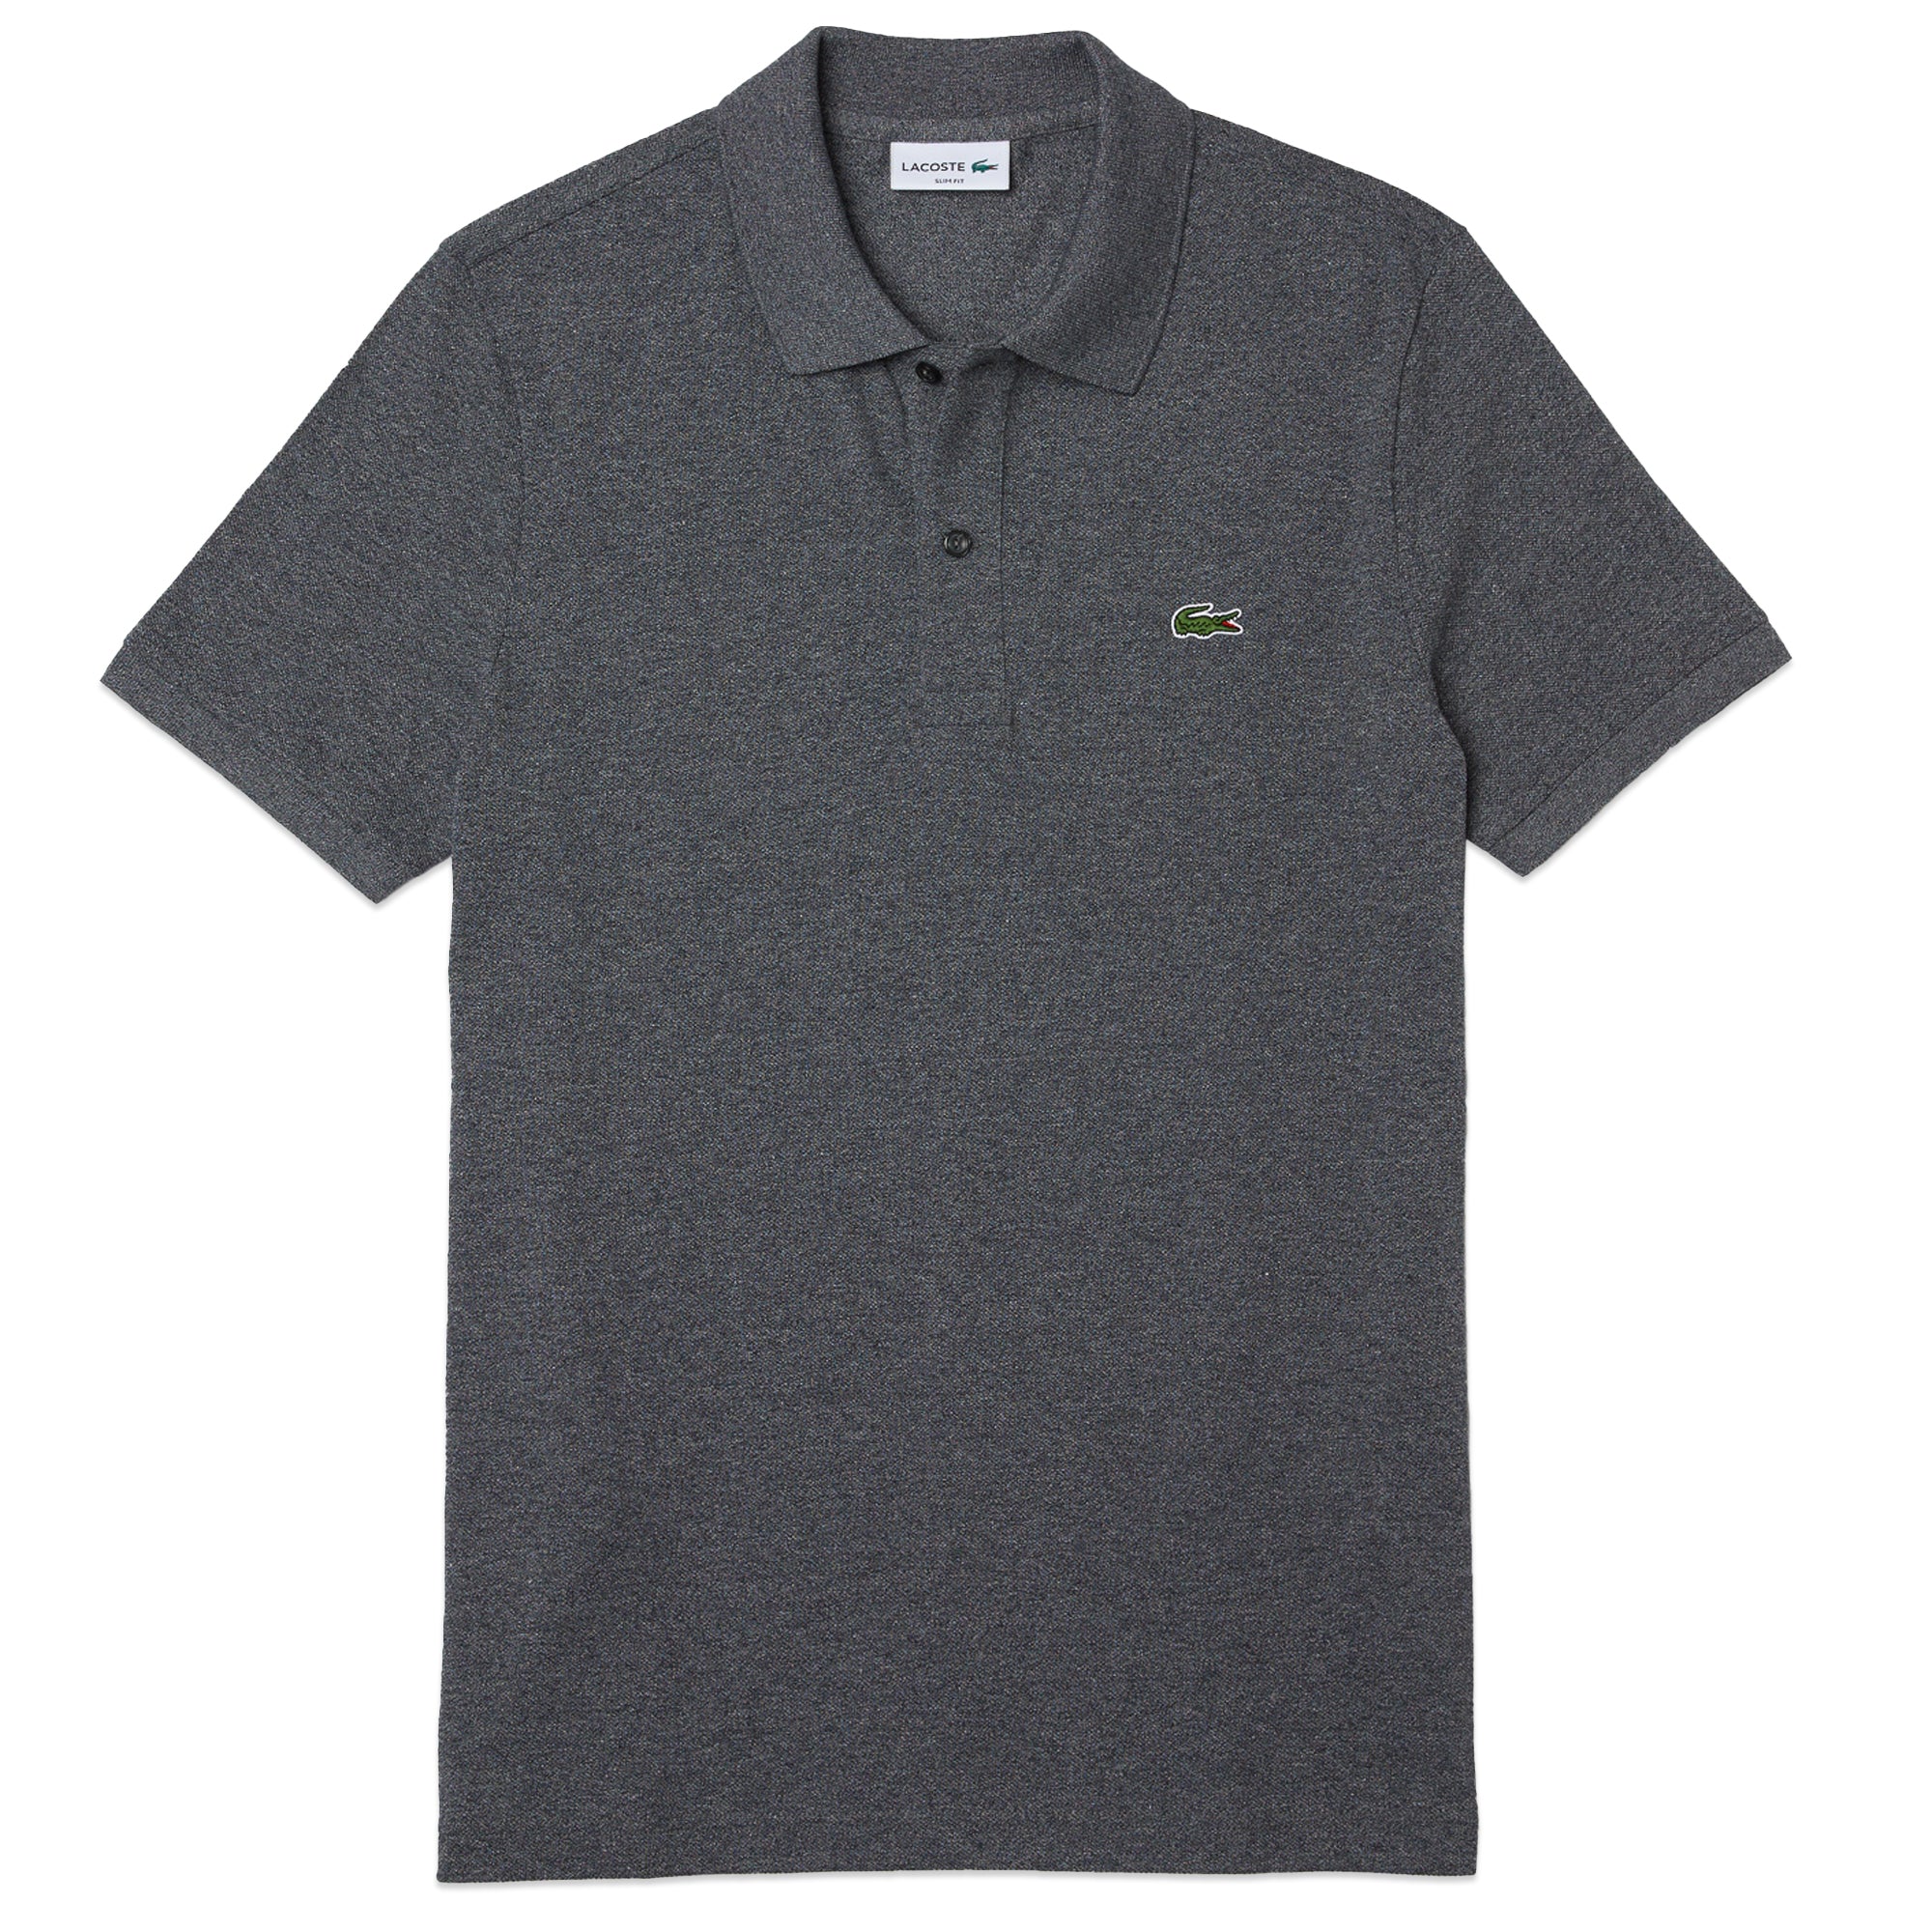 Lacoste Short Sleeved Slim Fit Polo PH4012 - Eclipse Jaspe